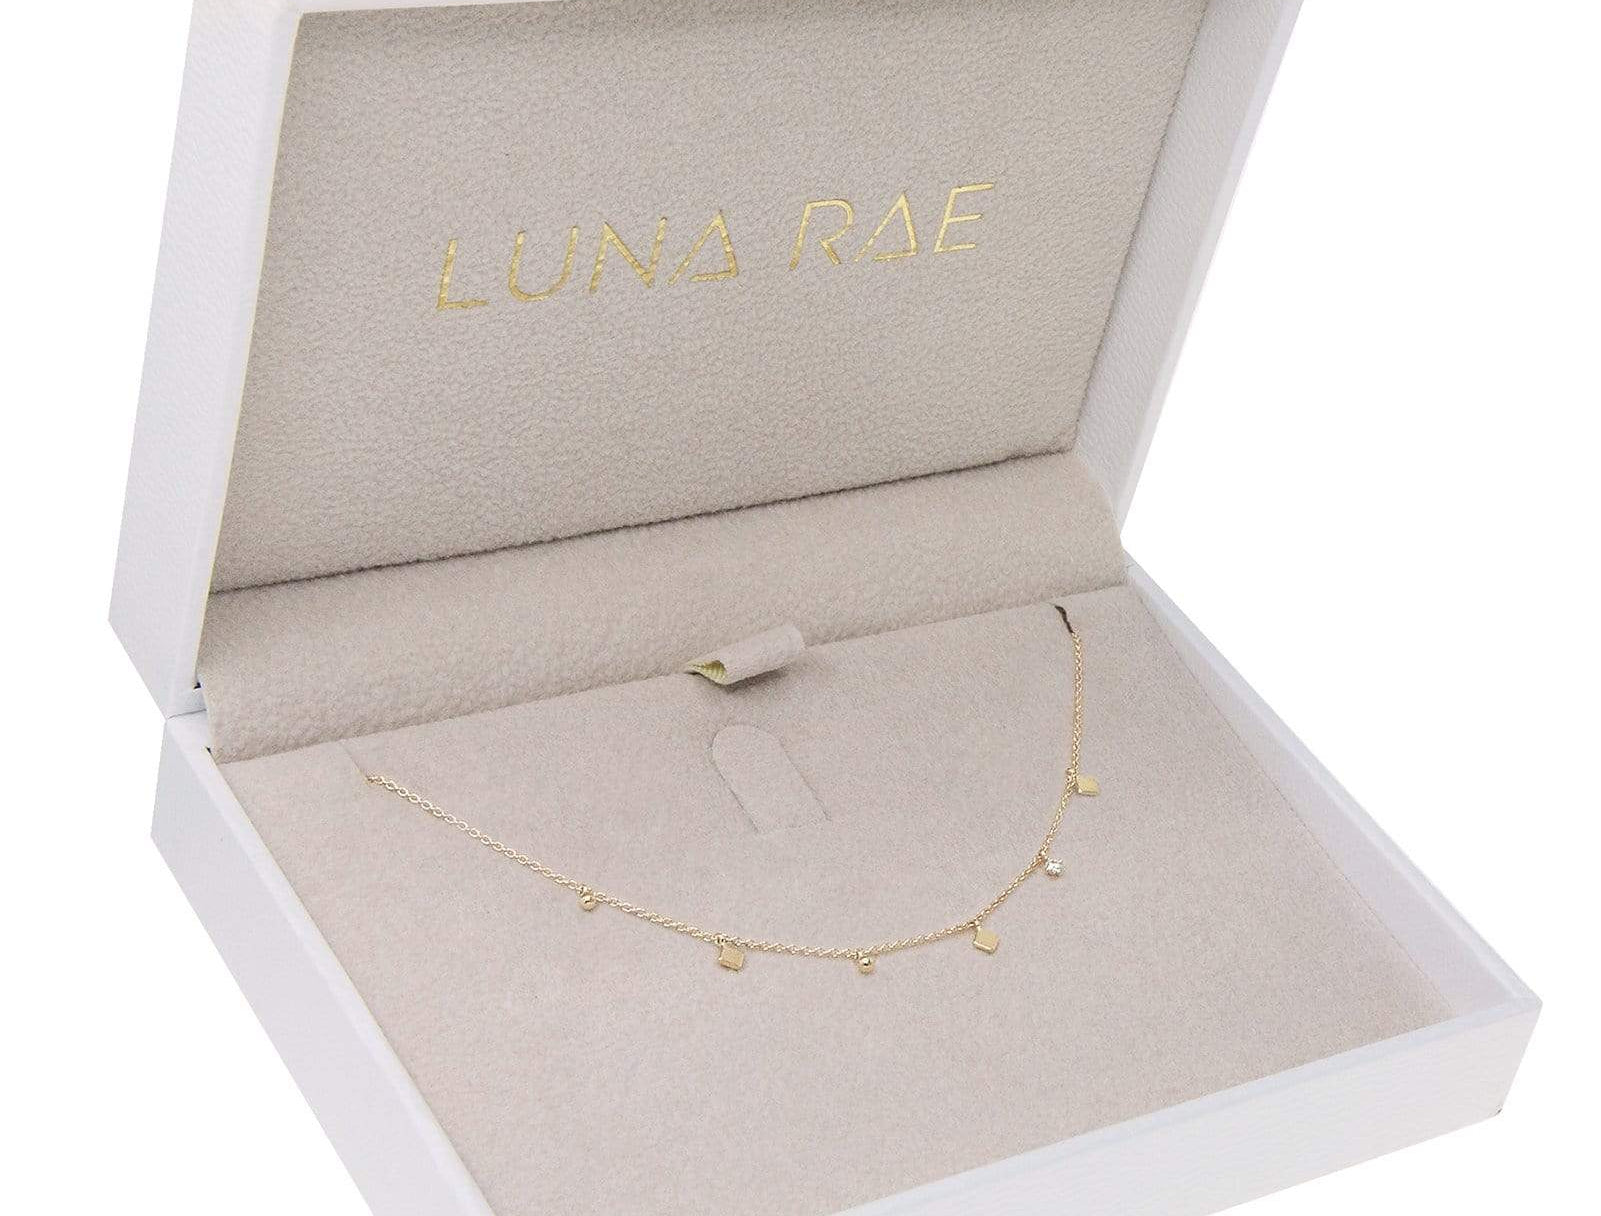 Picture of  Luna Rae solid 9k gold Mirrored Stars Necklace